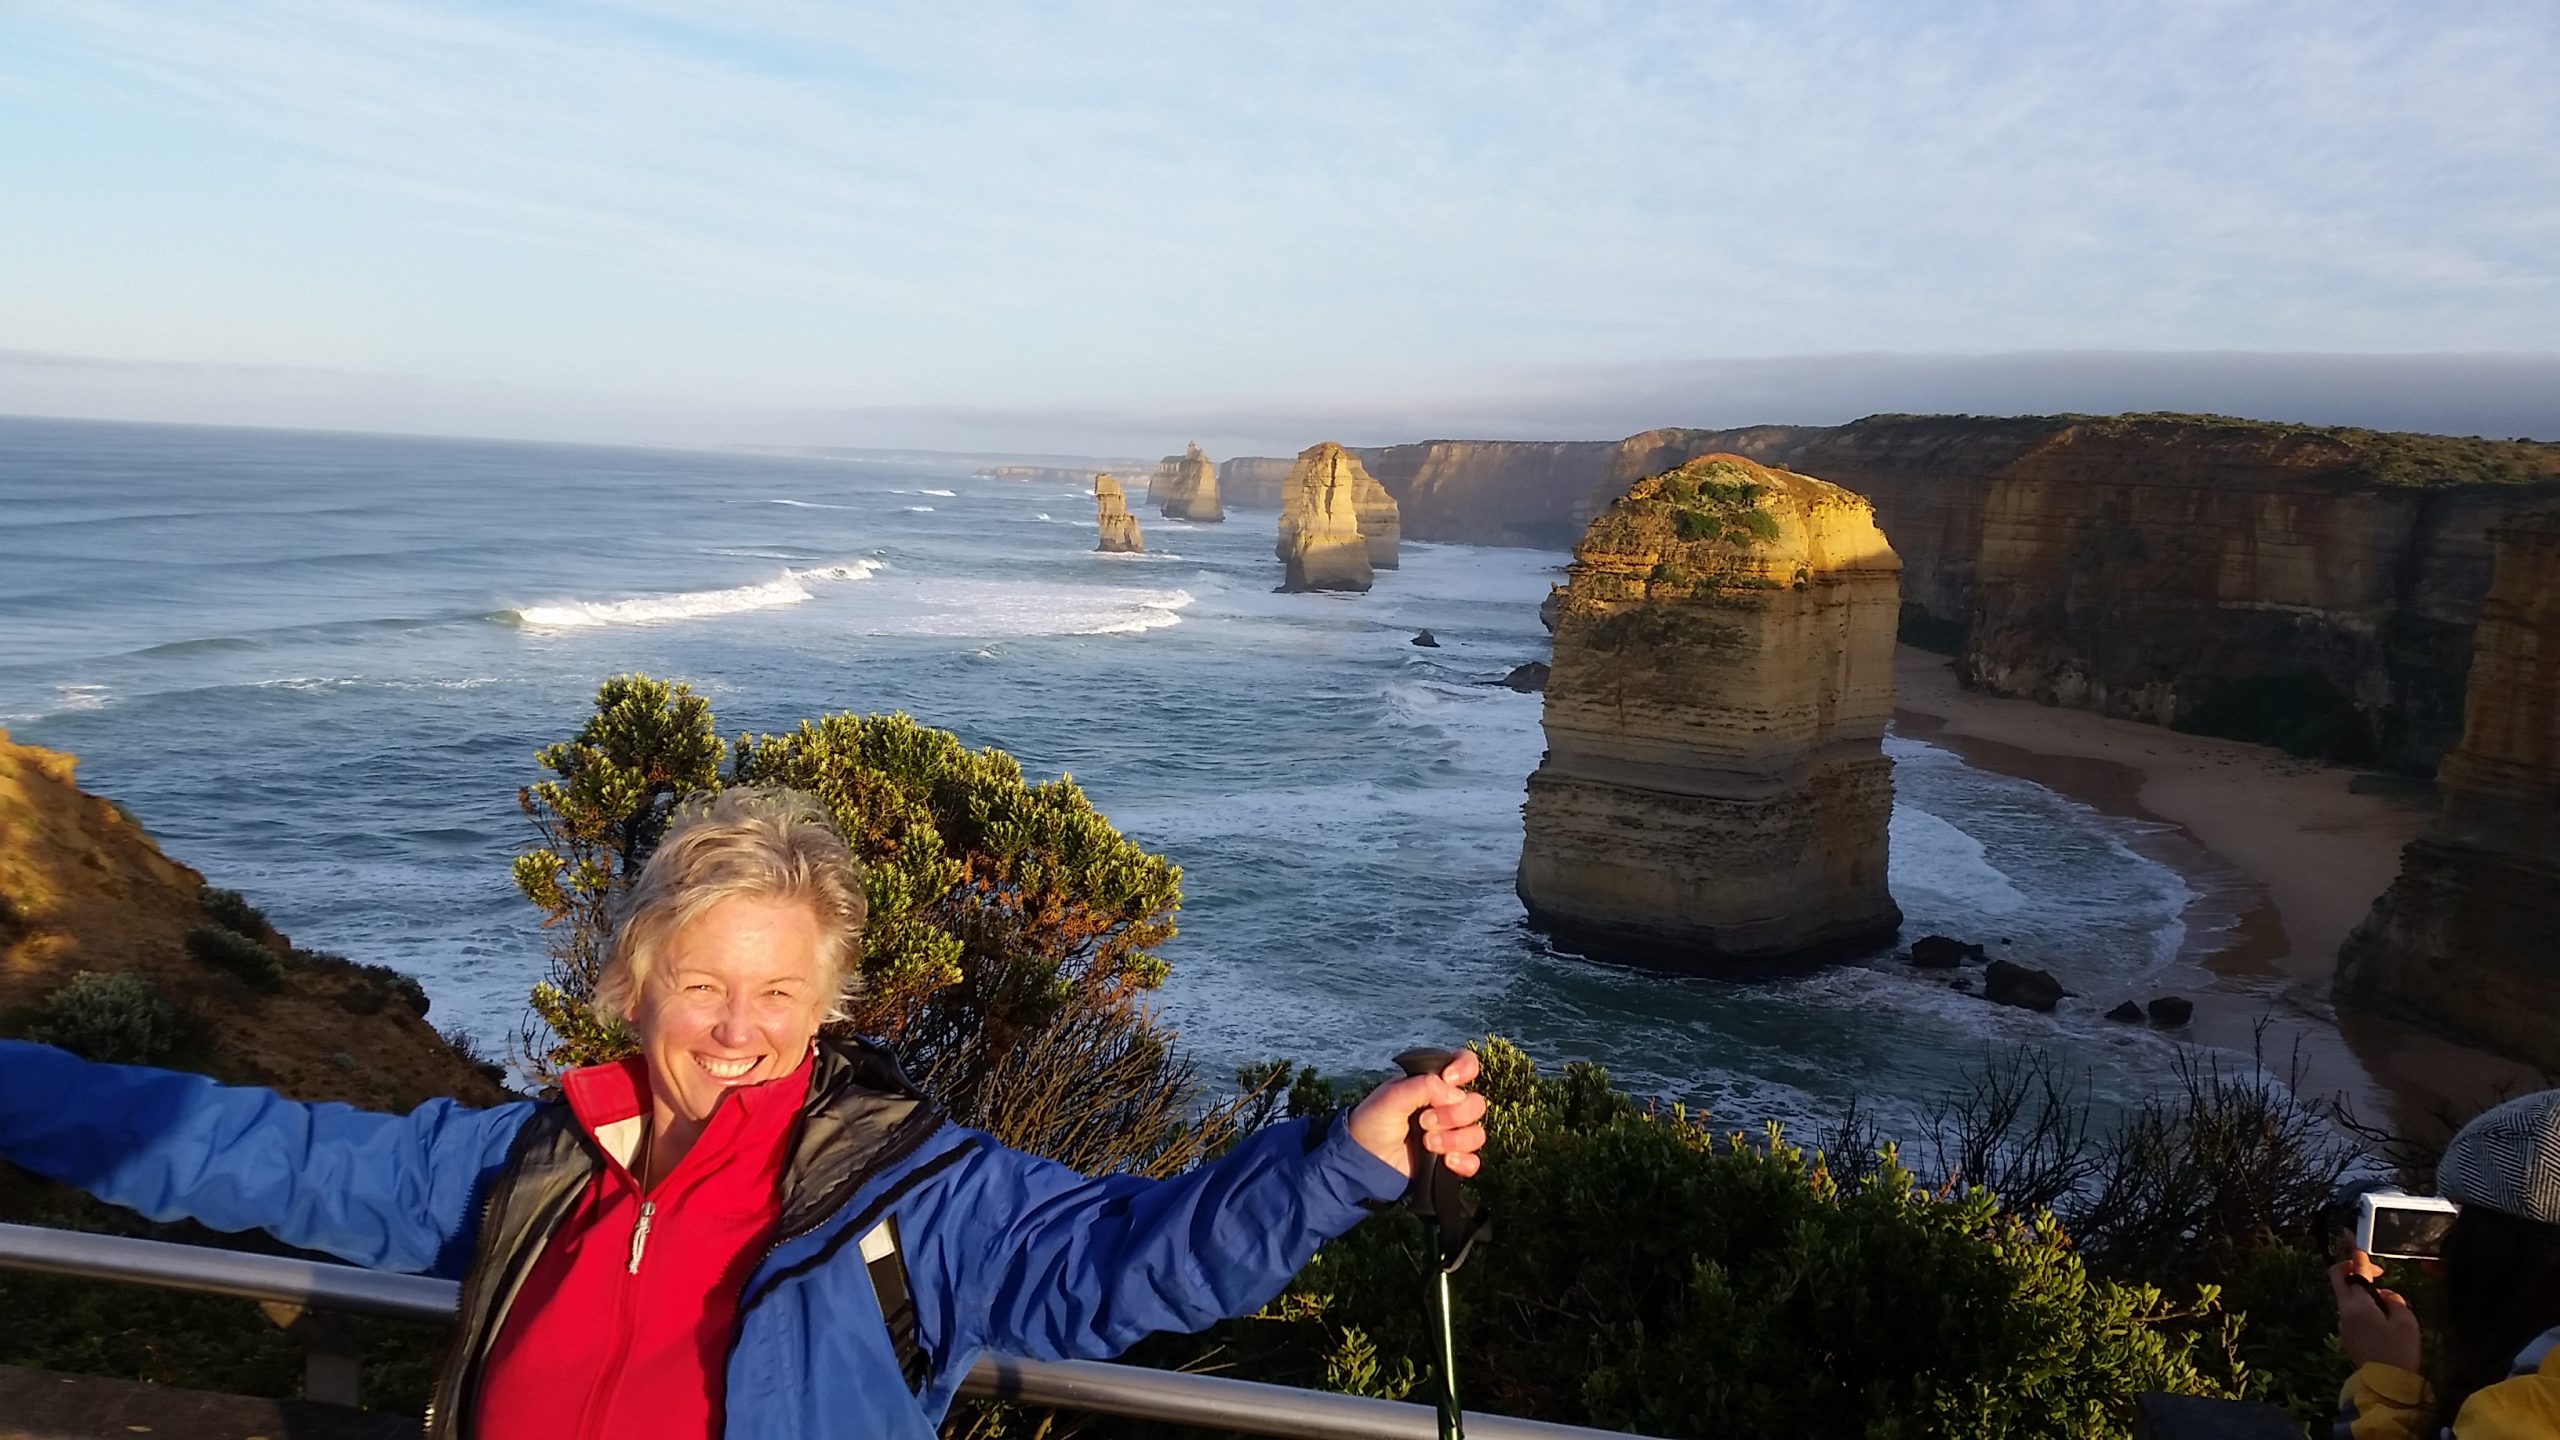 https://mountainous-airport.flywheelsites.com/wp-content/uploads/2021/06/Susie-driver-at-12-Apostles-scaled.jpg